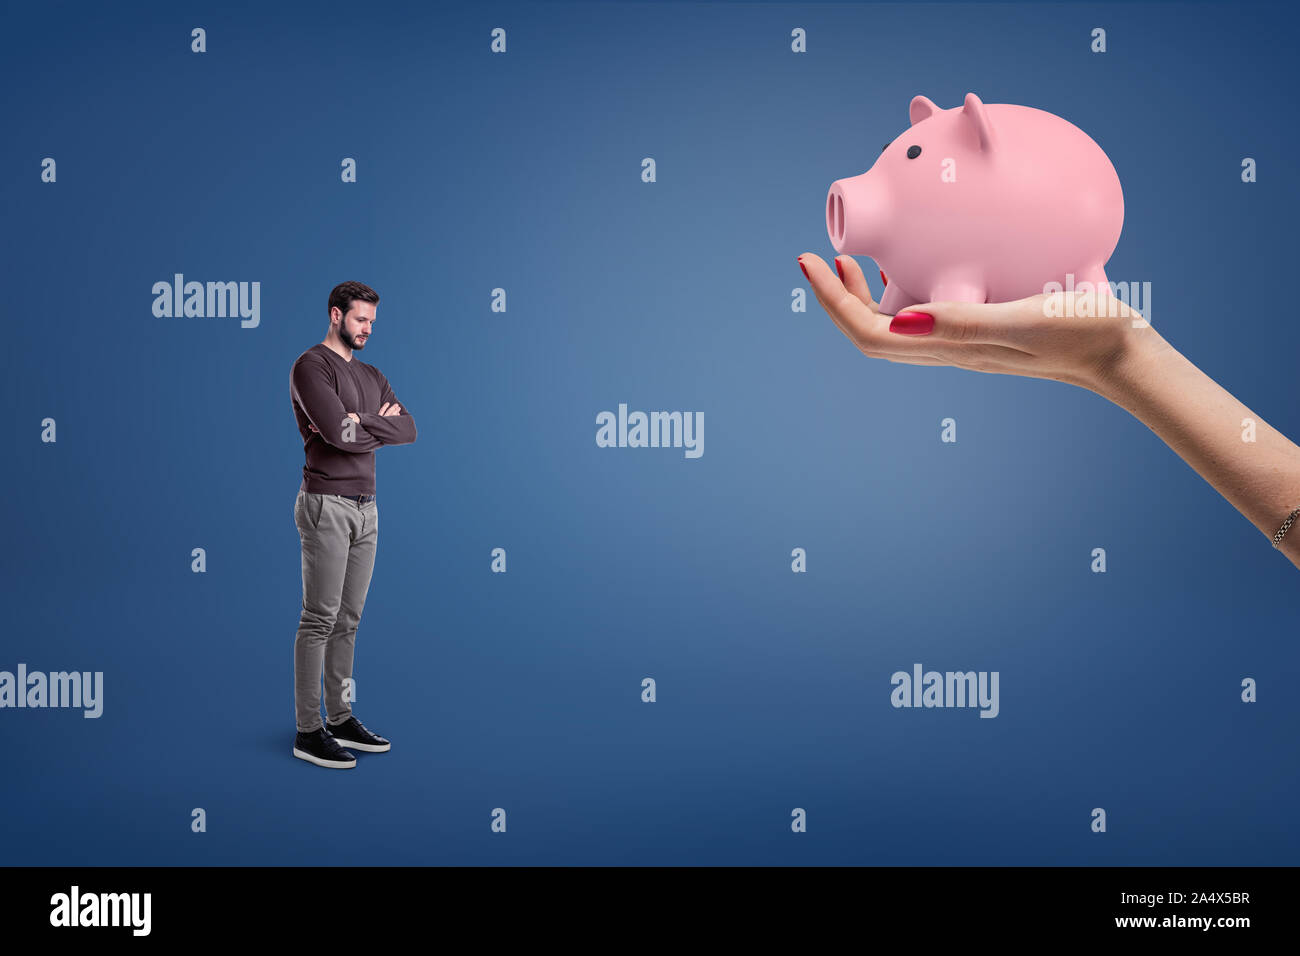 A small sad bearded man stands near a large female hand holding a piggy bank. Stock Photo